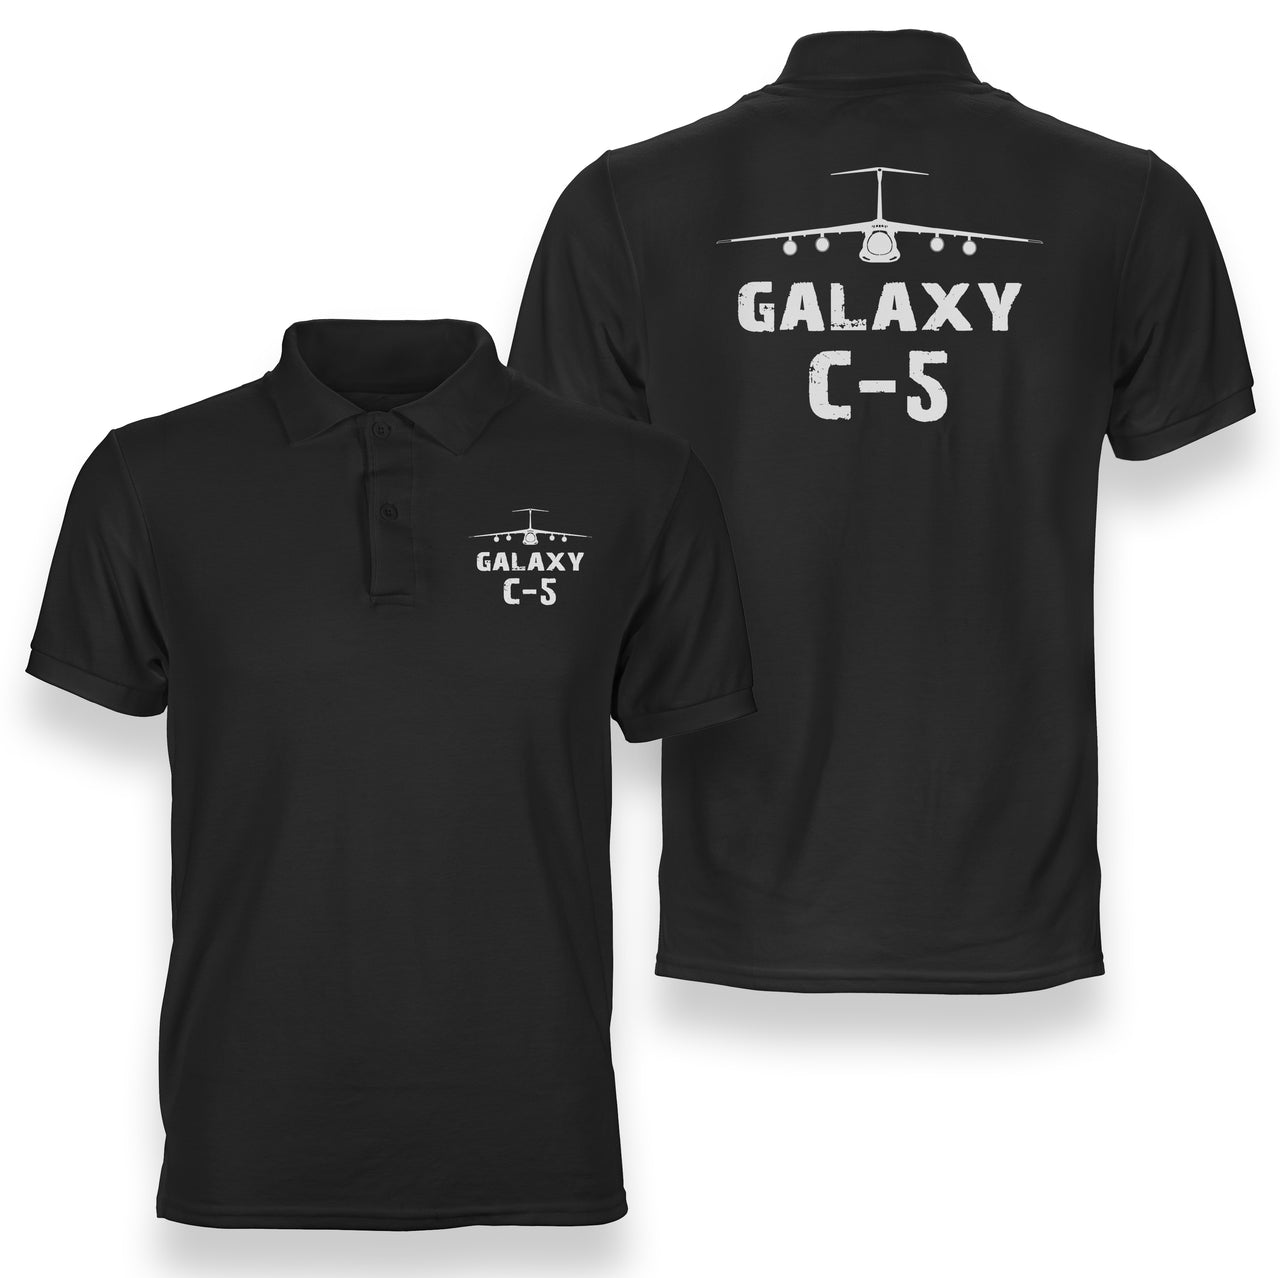 Galaxy C-5 & Plane Designed Double Side Polo T-Shirts